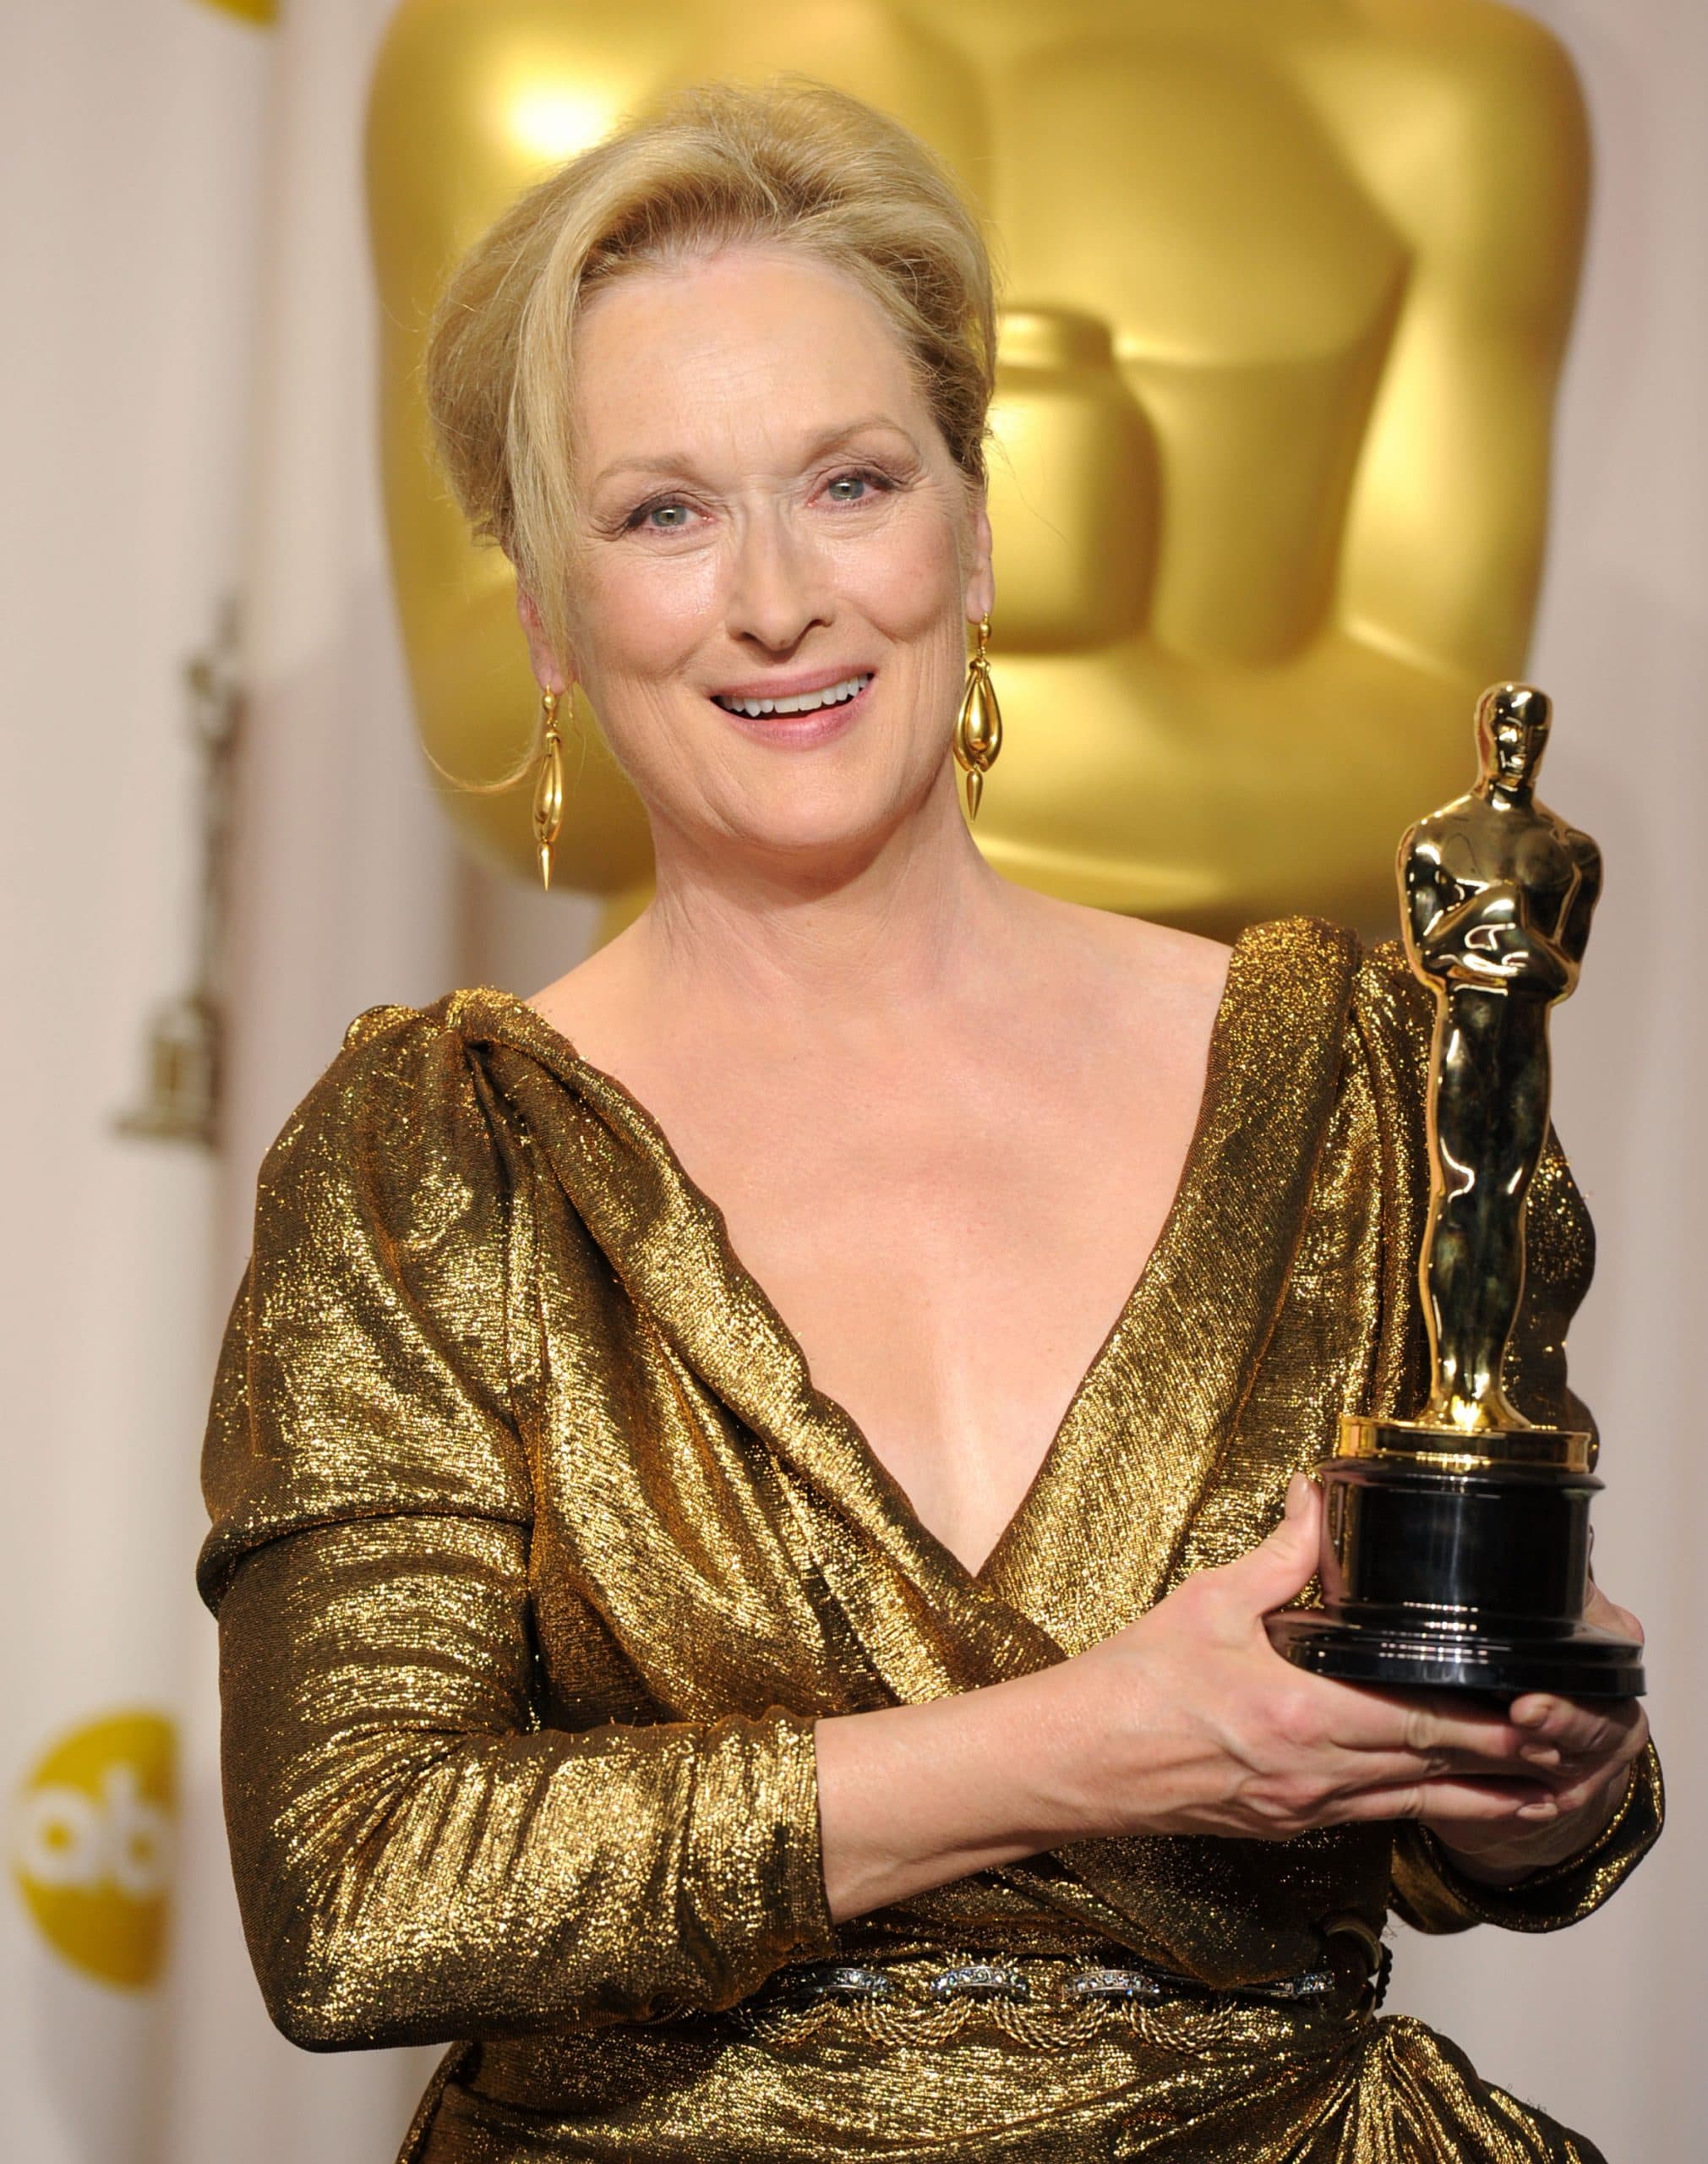 HOLLYWOOD, CA - FEBRUARY 26:  Actress Meryl Streep, winner of the Best Actress Award for 'The Iron Lady,' poses in the press room at the 84th Annual Academy Awards held at the Hollywood &amp; Highland Center on February 26, 2012 in Hollywood, California.  (Photo by Jason Merritt/Getty Images)